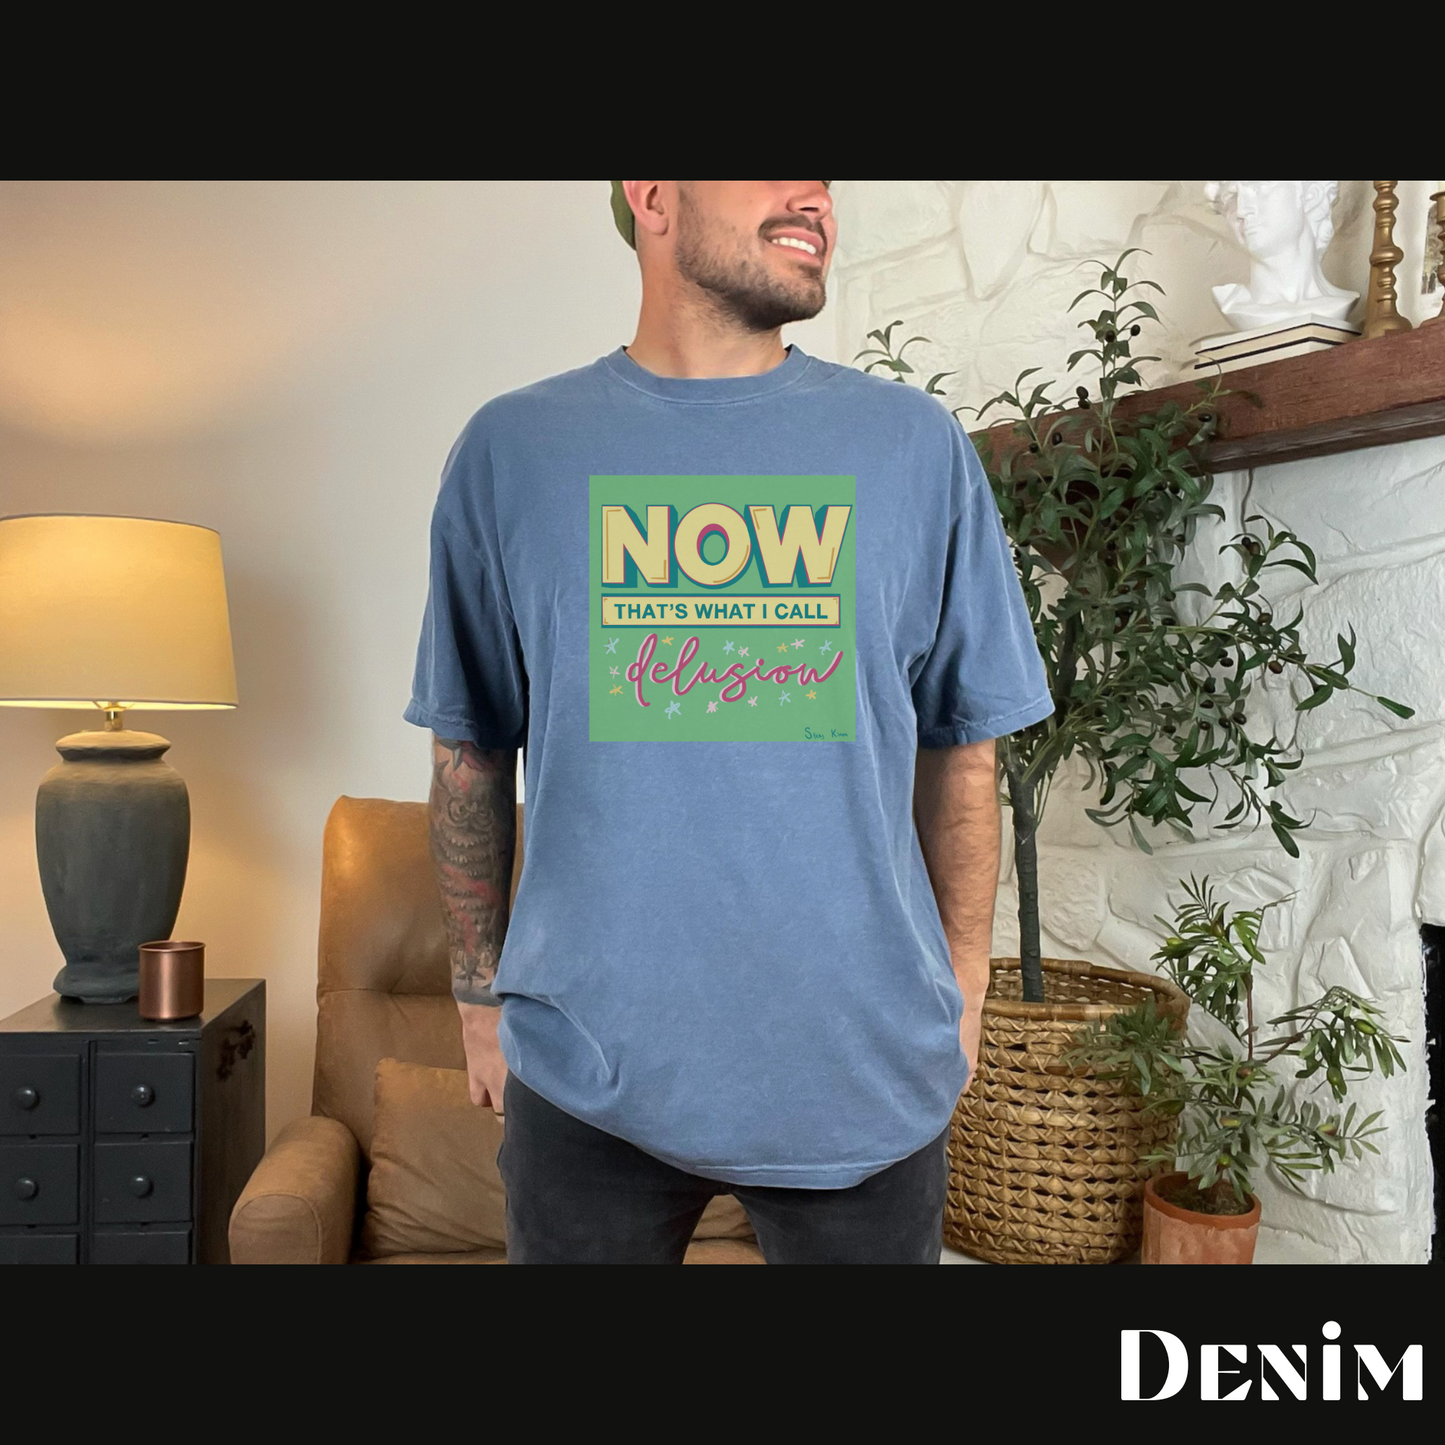 Now that's what I call delusion T-Shirt